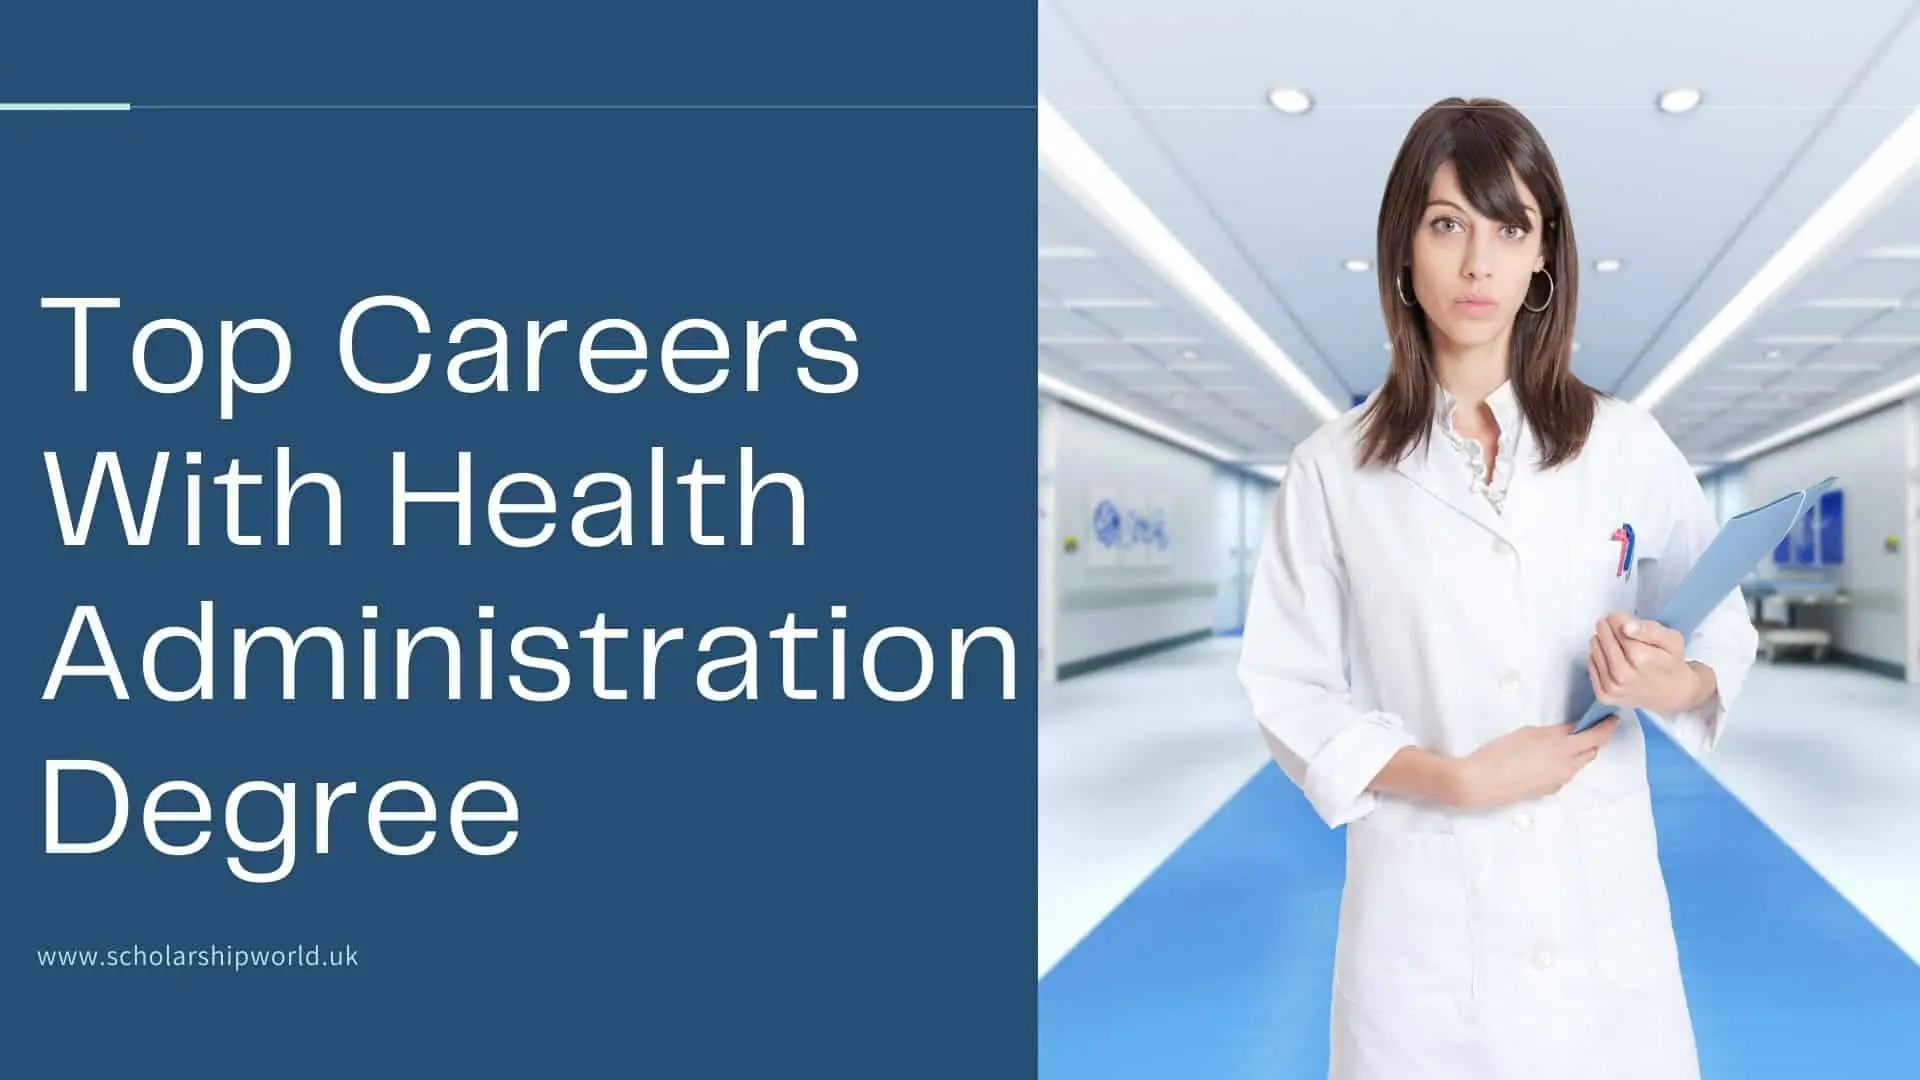 Top Careers With Health Administration Degree